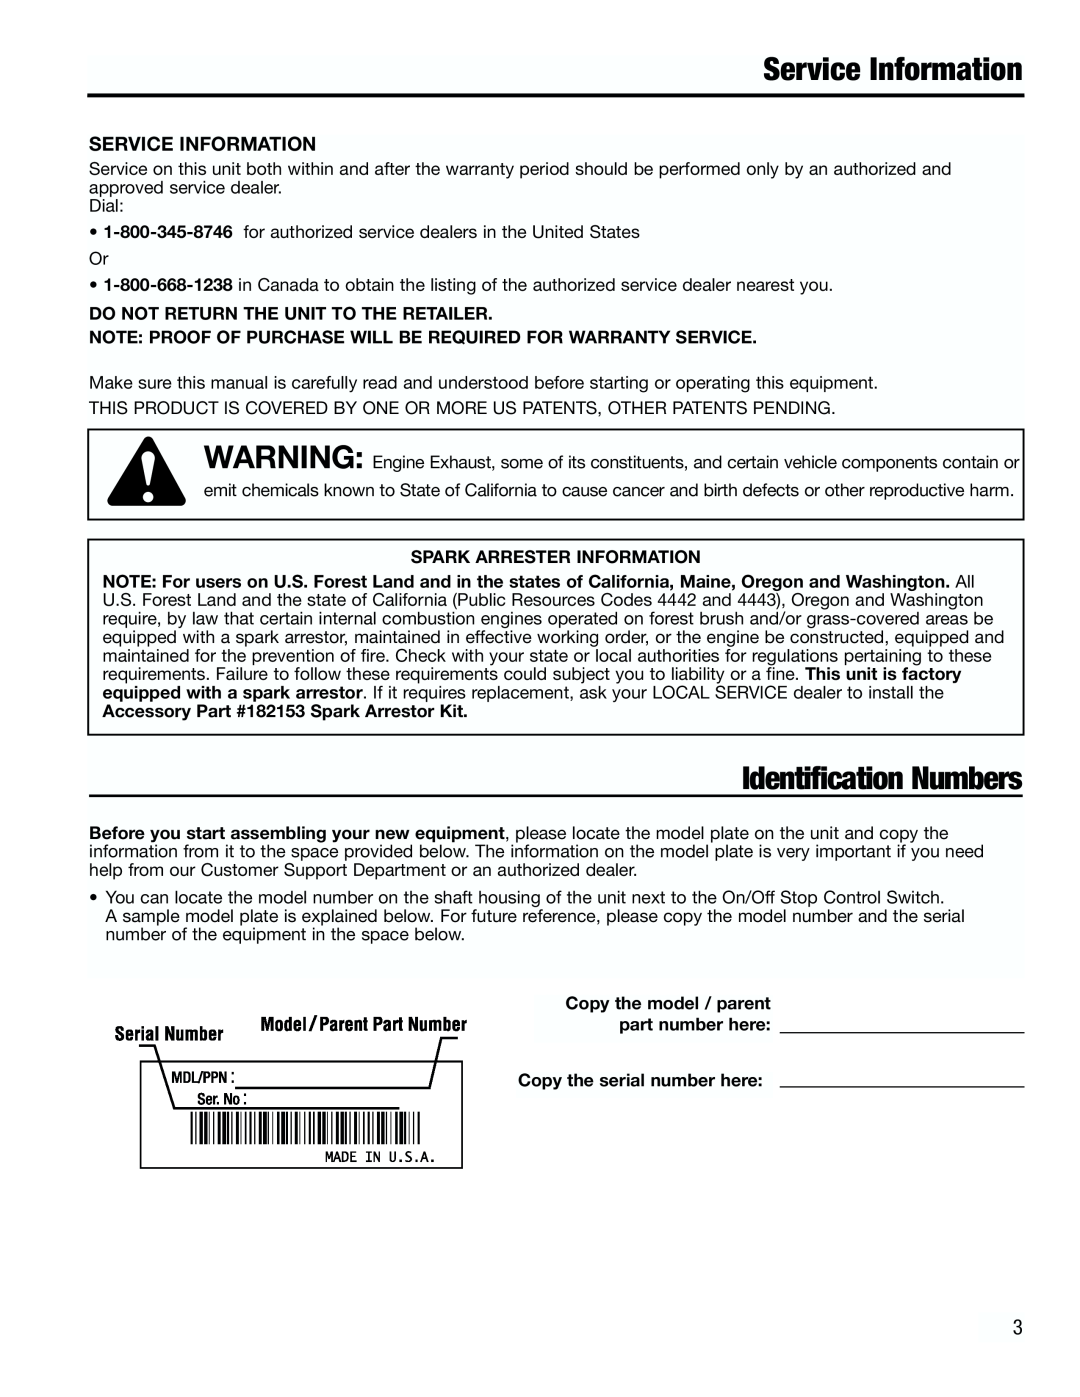 Troy-Bilt TB4000 manual Service Information, Identification Numbers, Do Not Return The Unit To The Retailer 